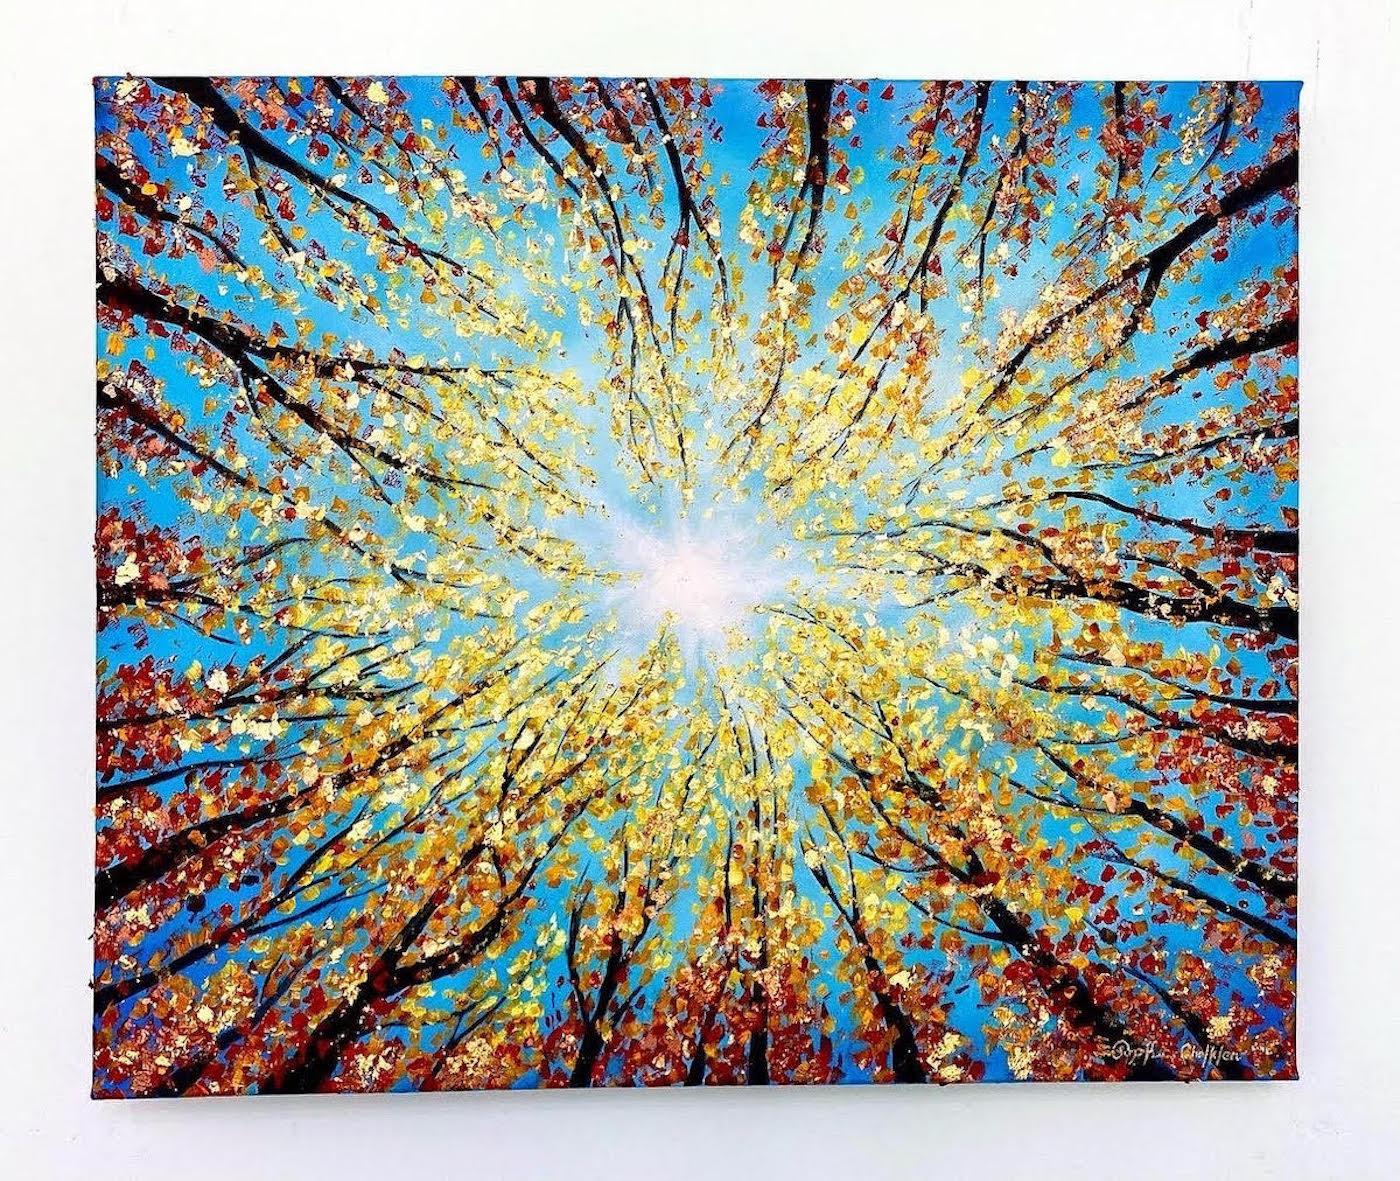 Sophia Chalklen  Abstract Painting - Reach for the Light by Sophia Chalklen, Original painting, Landscape, Tree art